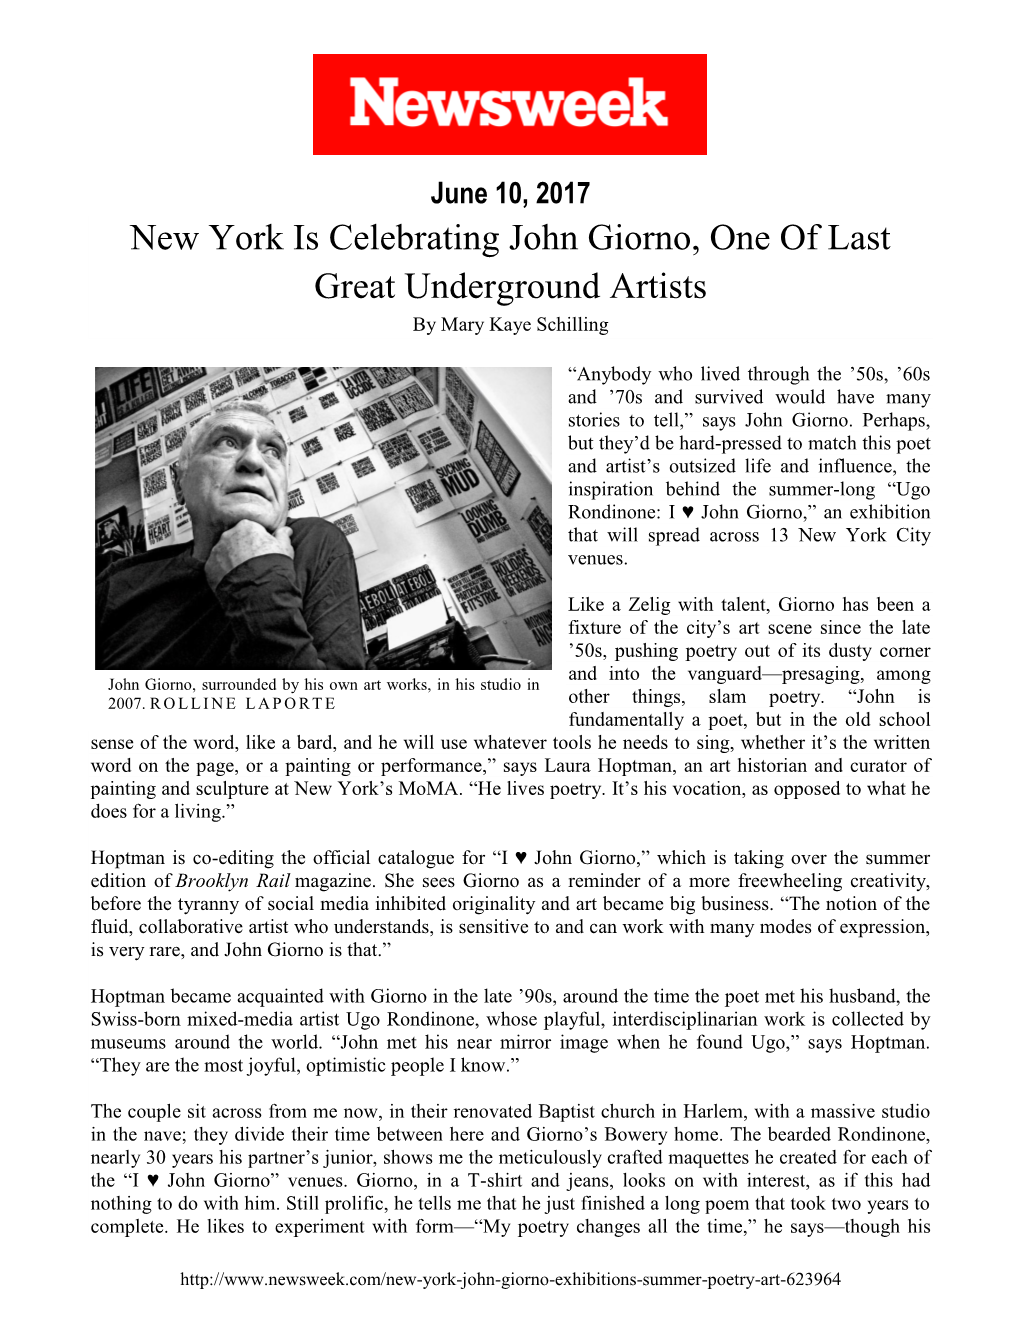 New York Is Celebrating John Giorno, One of Last Great Underground Artists by Mary Kaye Schilling